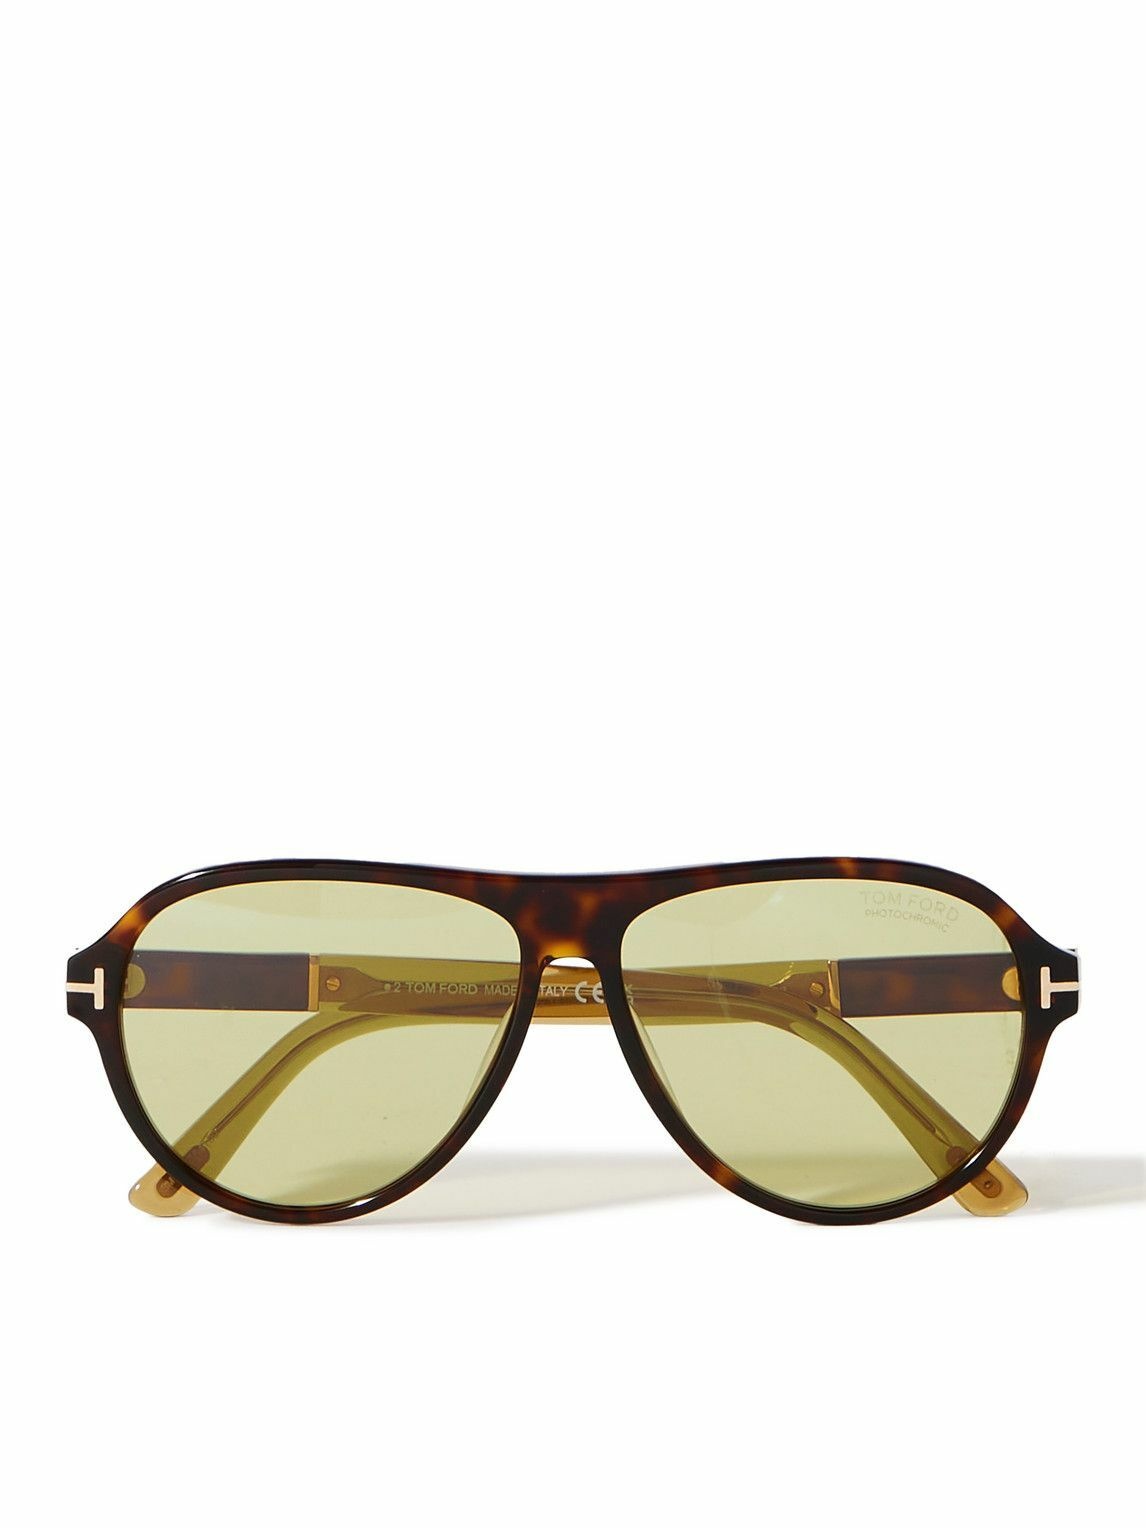 Photo: TOM FORD - Quincy Aviator-Style Tortoiseshell Acetate and Gold-Tone Sunglasses